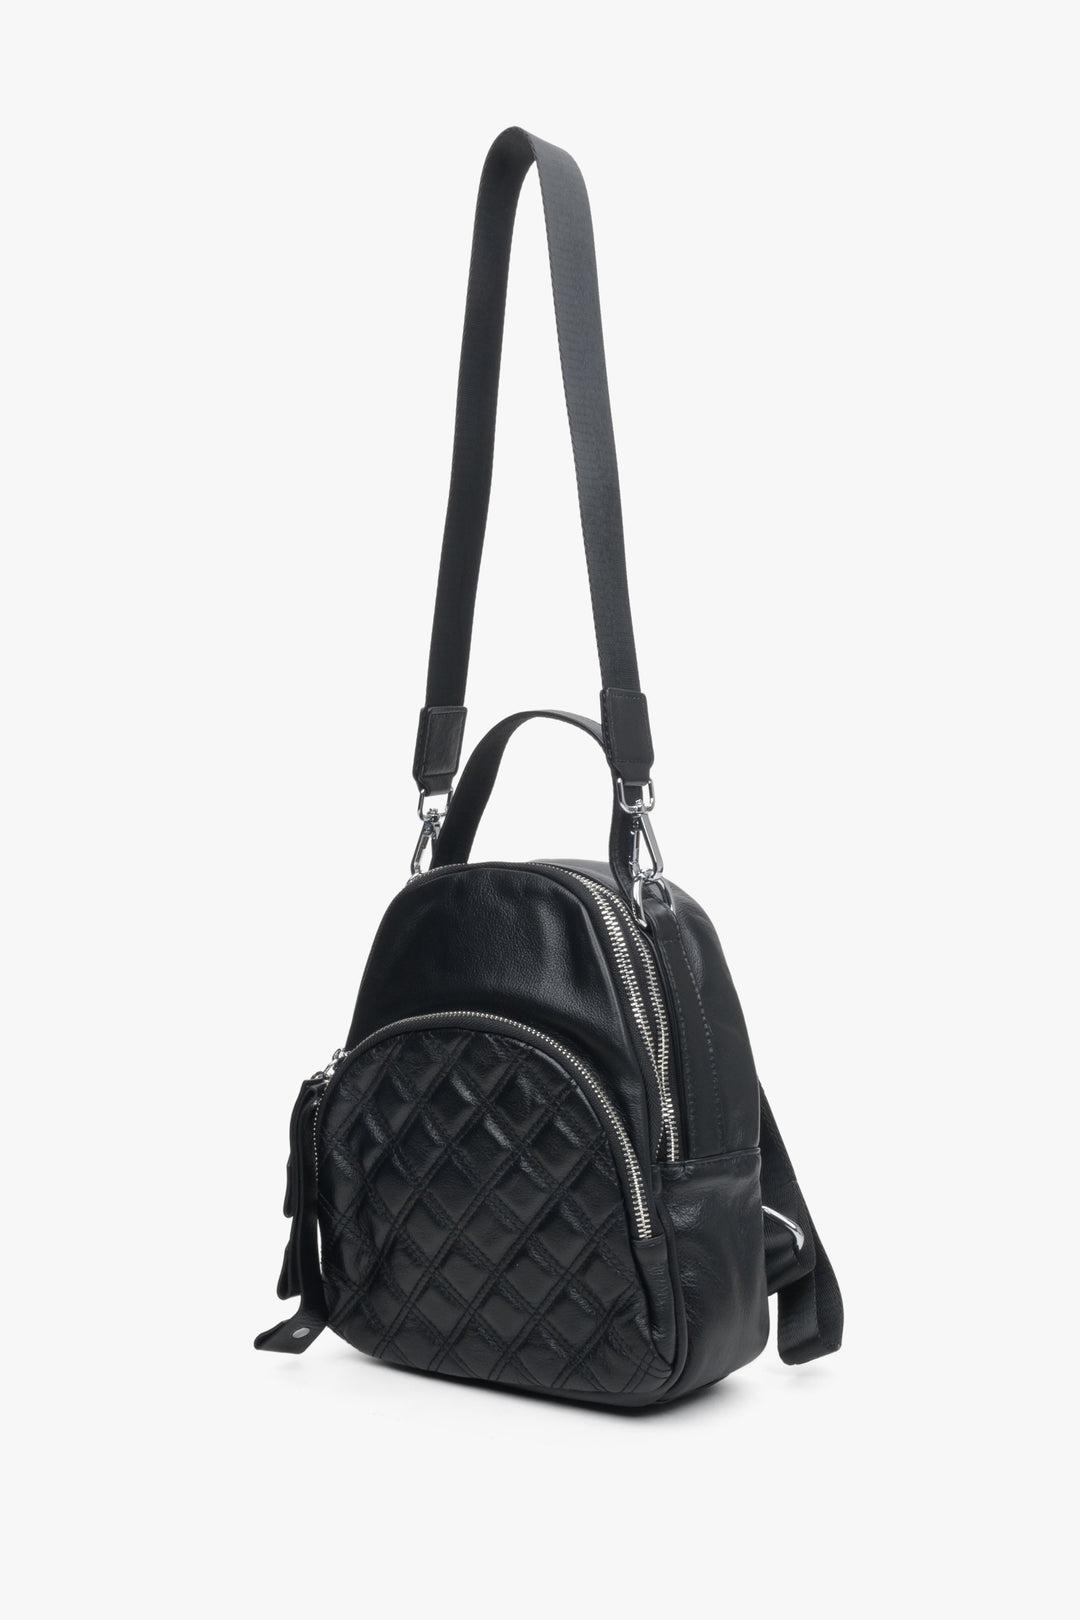 Estro's women's black leather backpack - presentation of the model with the long strap extended.